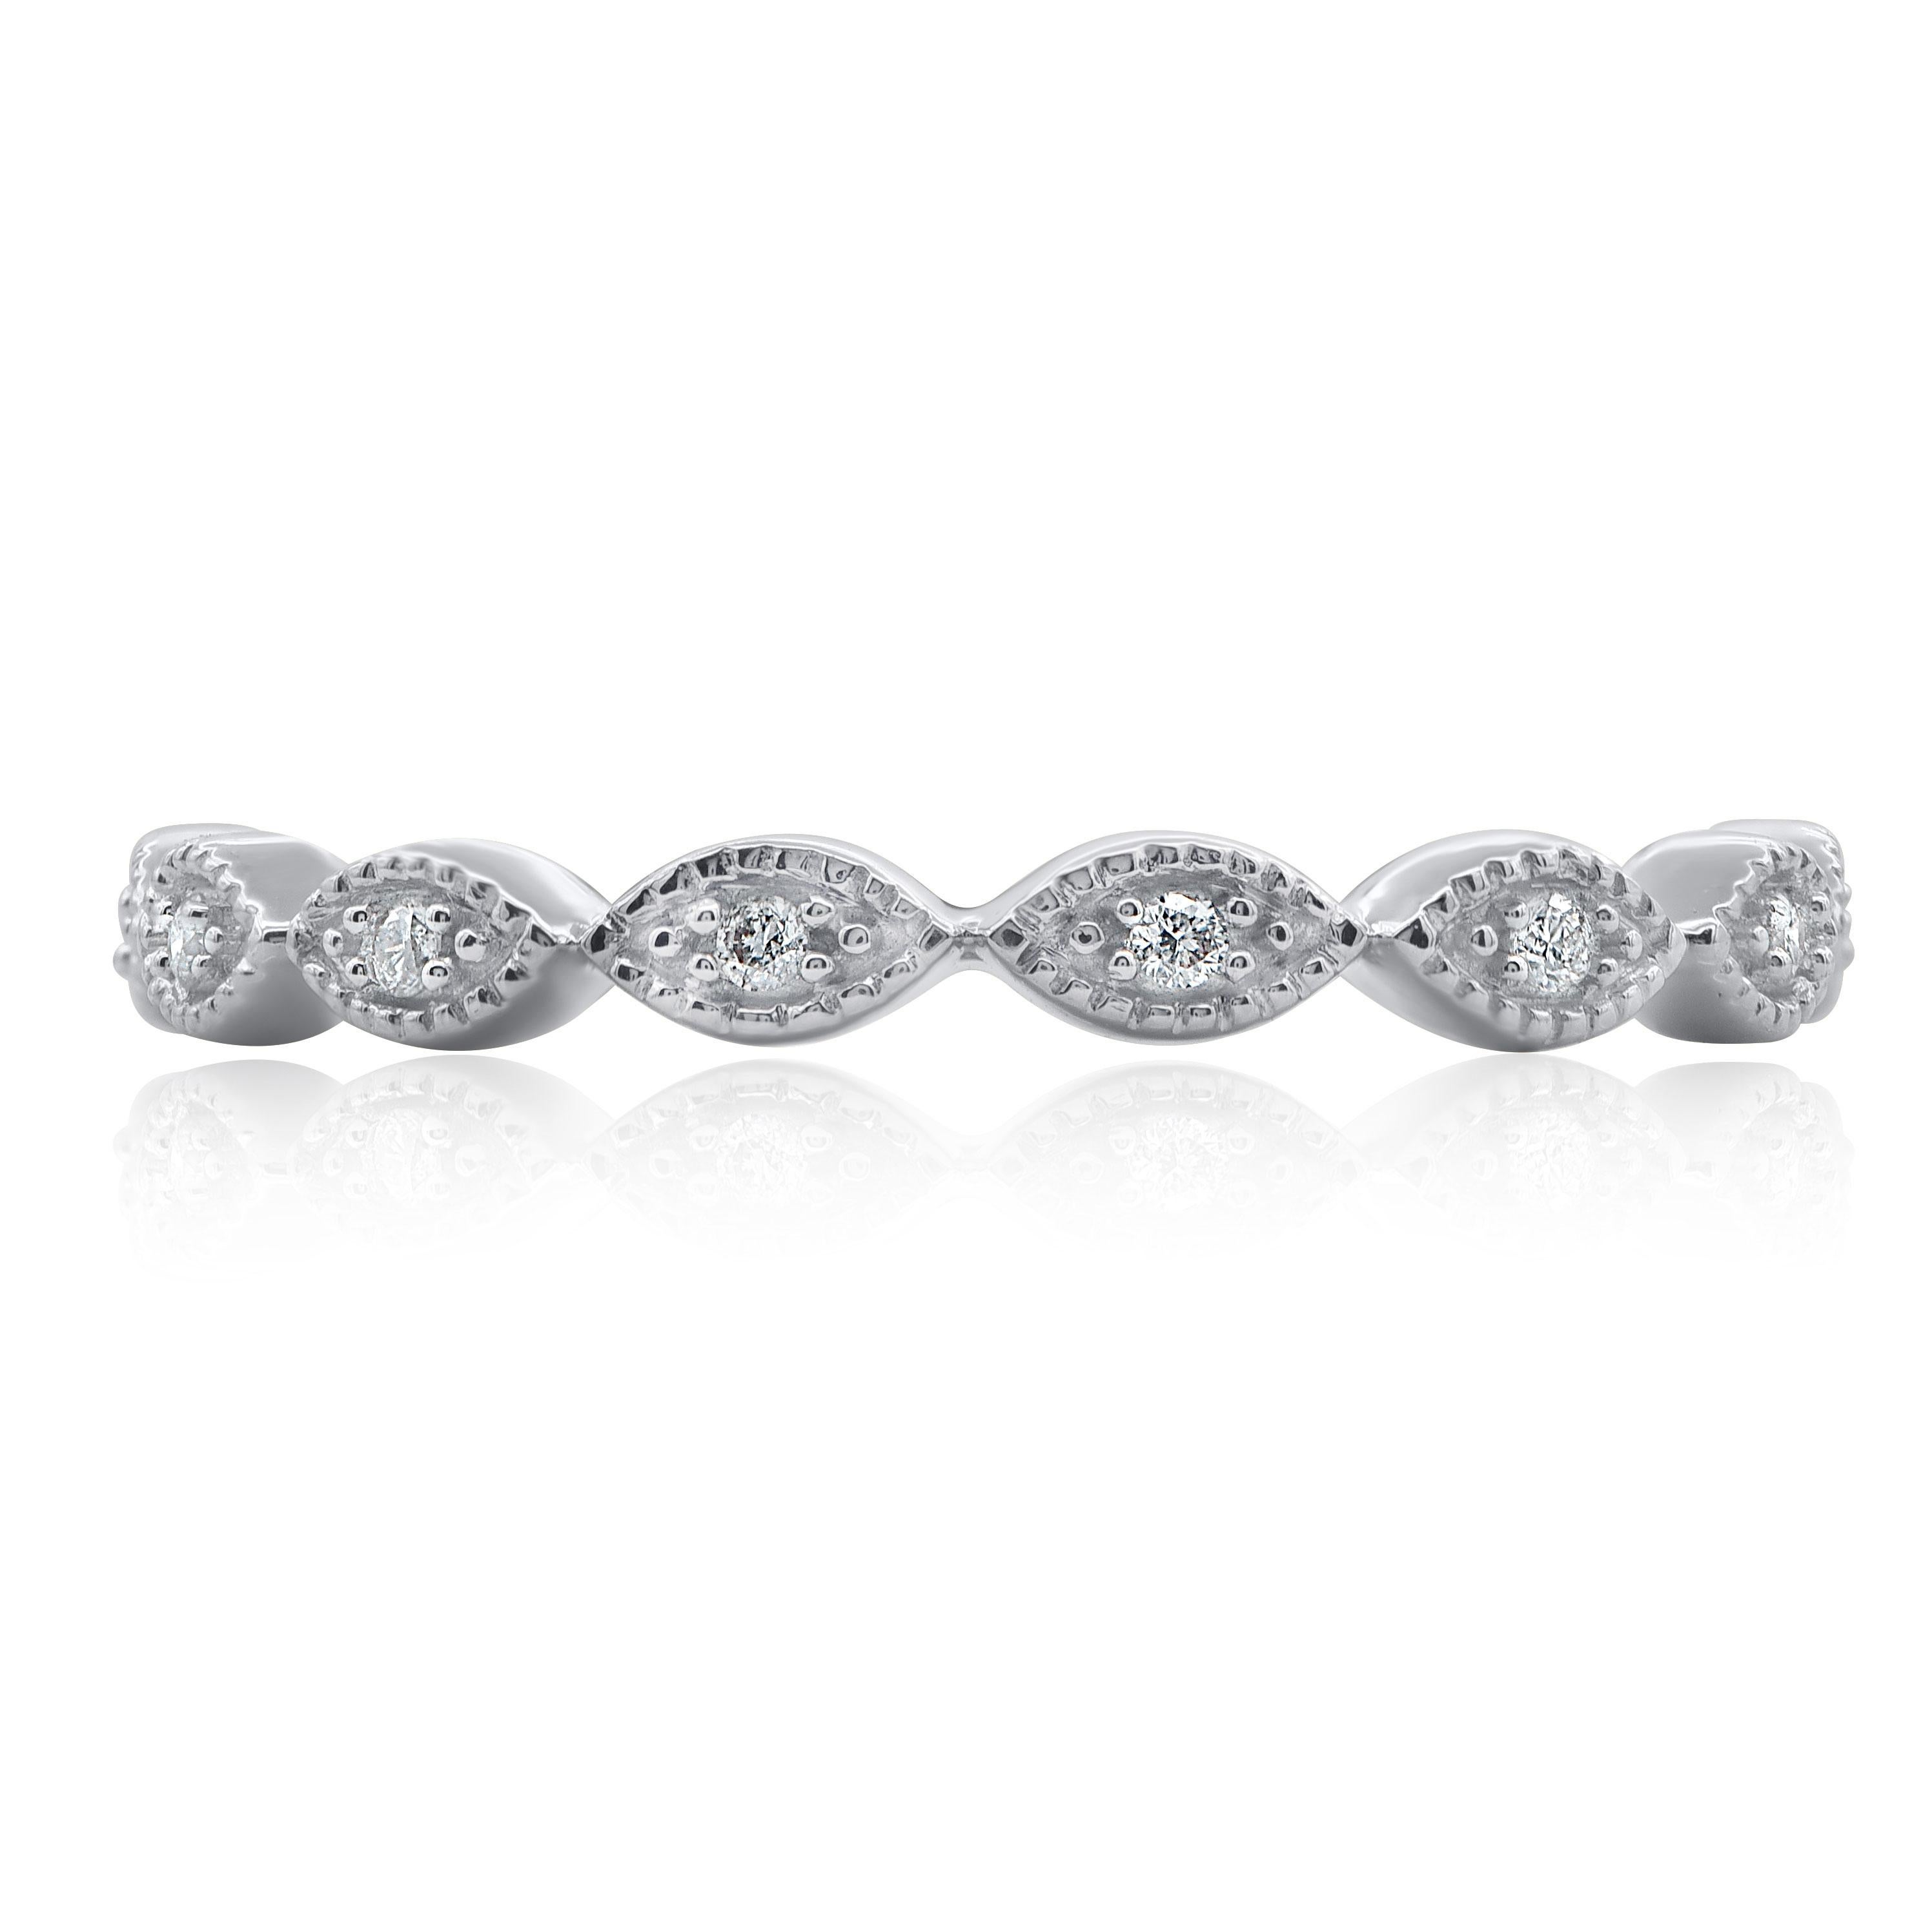 Honor the women you love with this eternity wedding band is expertly crafted in 14 Karat White Gold and features 13 brilliant cut round diamond set in pave setting. This eternity band has high polish finish and is a valuable addition to any jewelry